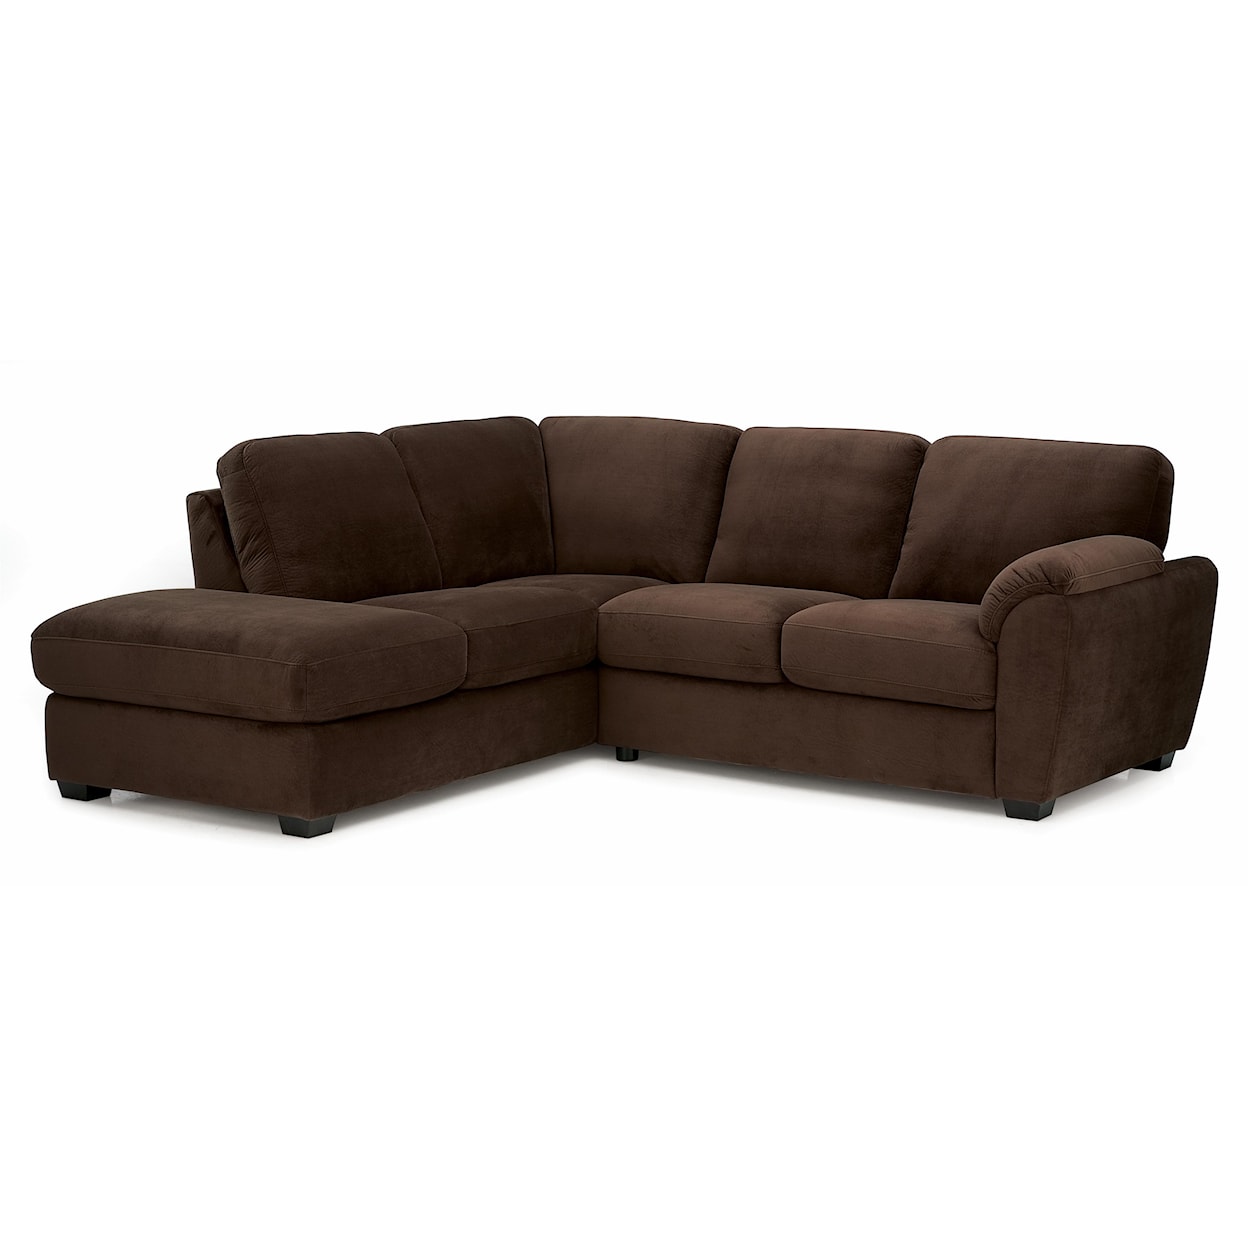 Palliser Lanza Two Piece Sectional Sofa with RHF Chaise